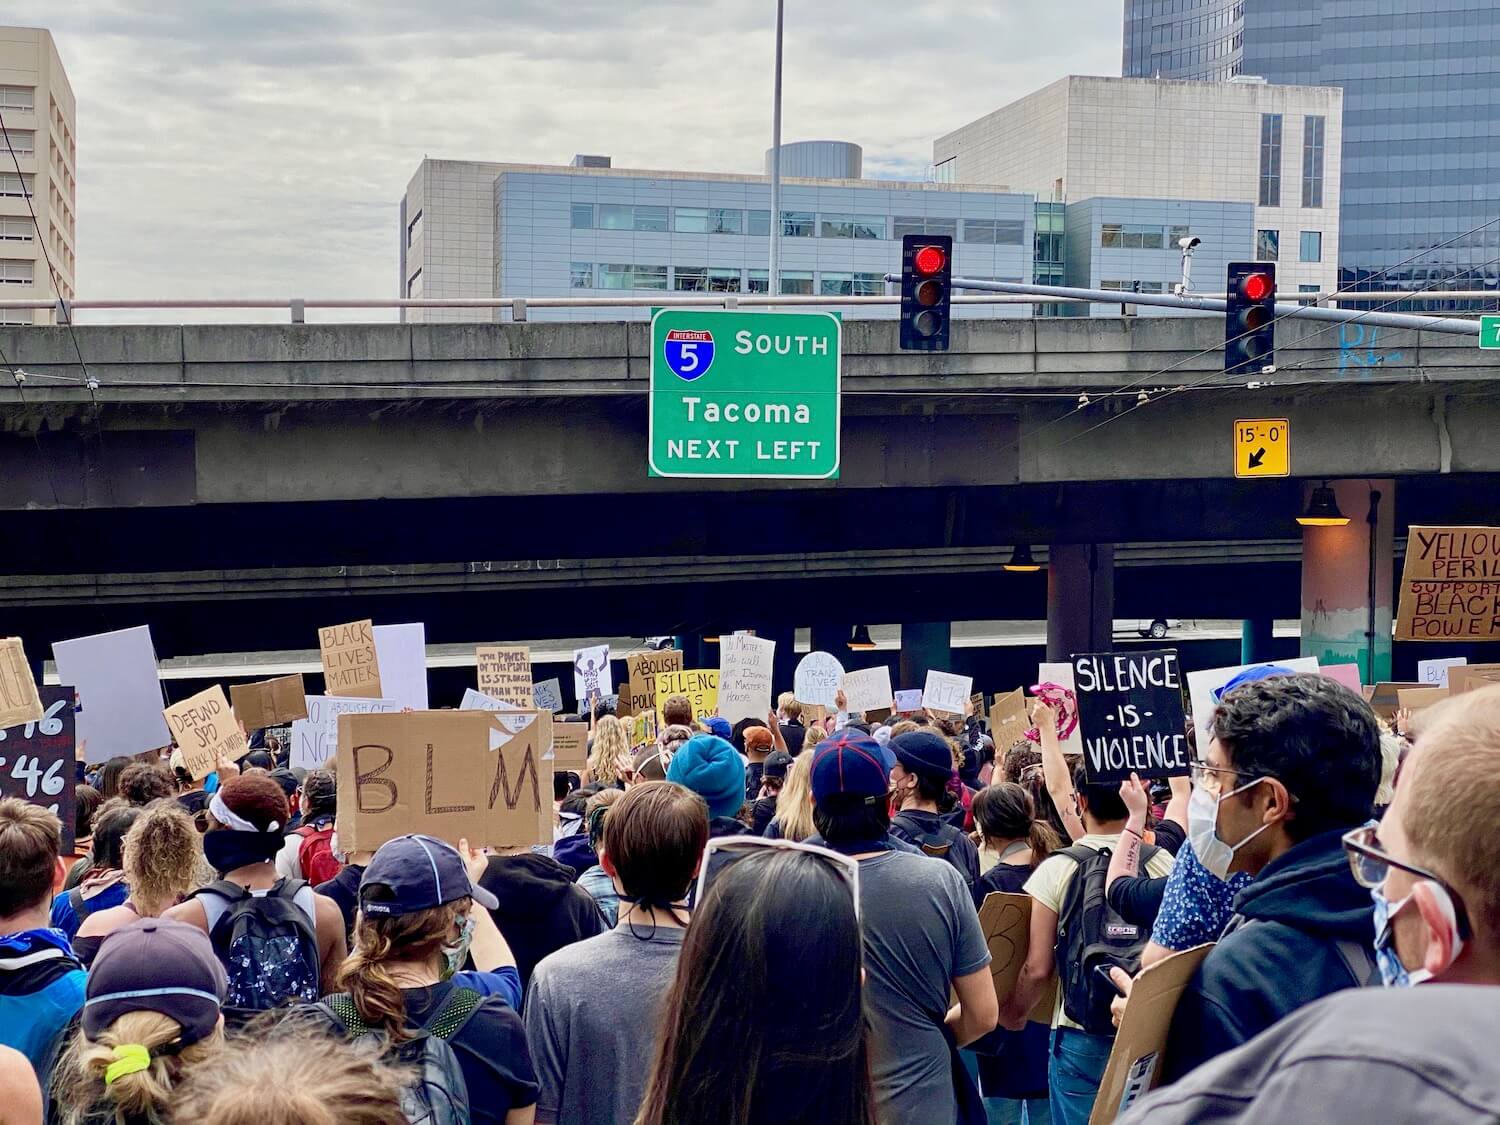 A large crowd marches down a steep roadway in Seattle, Washington towards a bridge with an interstate sign directing traffic South to Tacoma and two red stoplights.  The people are holding various signs that promote Black Lives Matter and other slogans like Silence is Violence.  In the background are other city buildings, including a sliver of the tan colored municipal jail.  